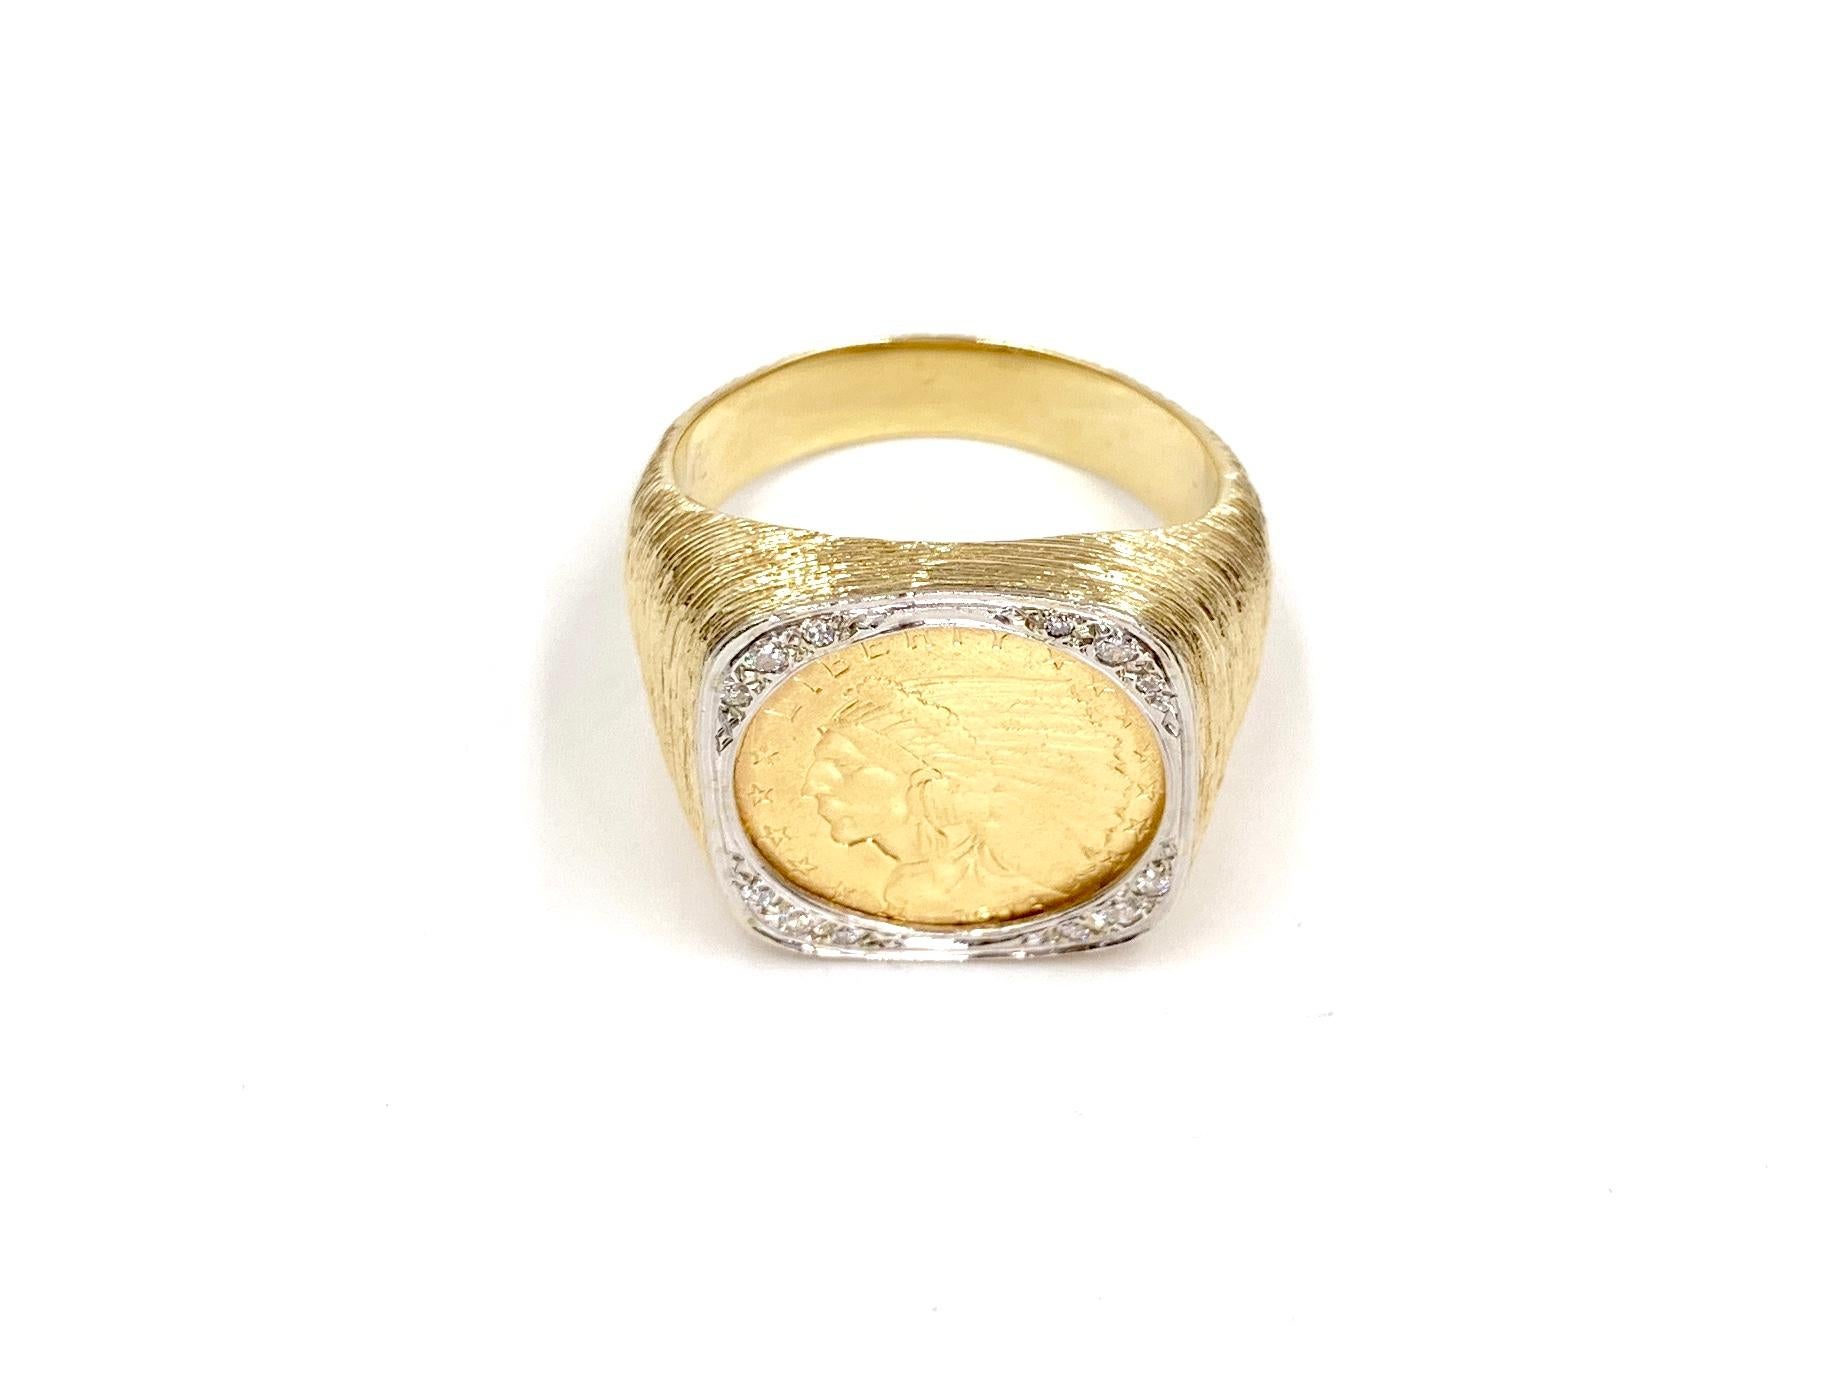 A substantially sized textured 14 karat gold ring featuring yellow gold coin referred to as “Indian Head” featuring an Indian chieftain wearing a traditional feather headdress. Circling the head is the text ‘Liberty’ and ‘1913,’ in addition to 13